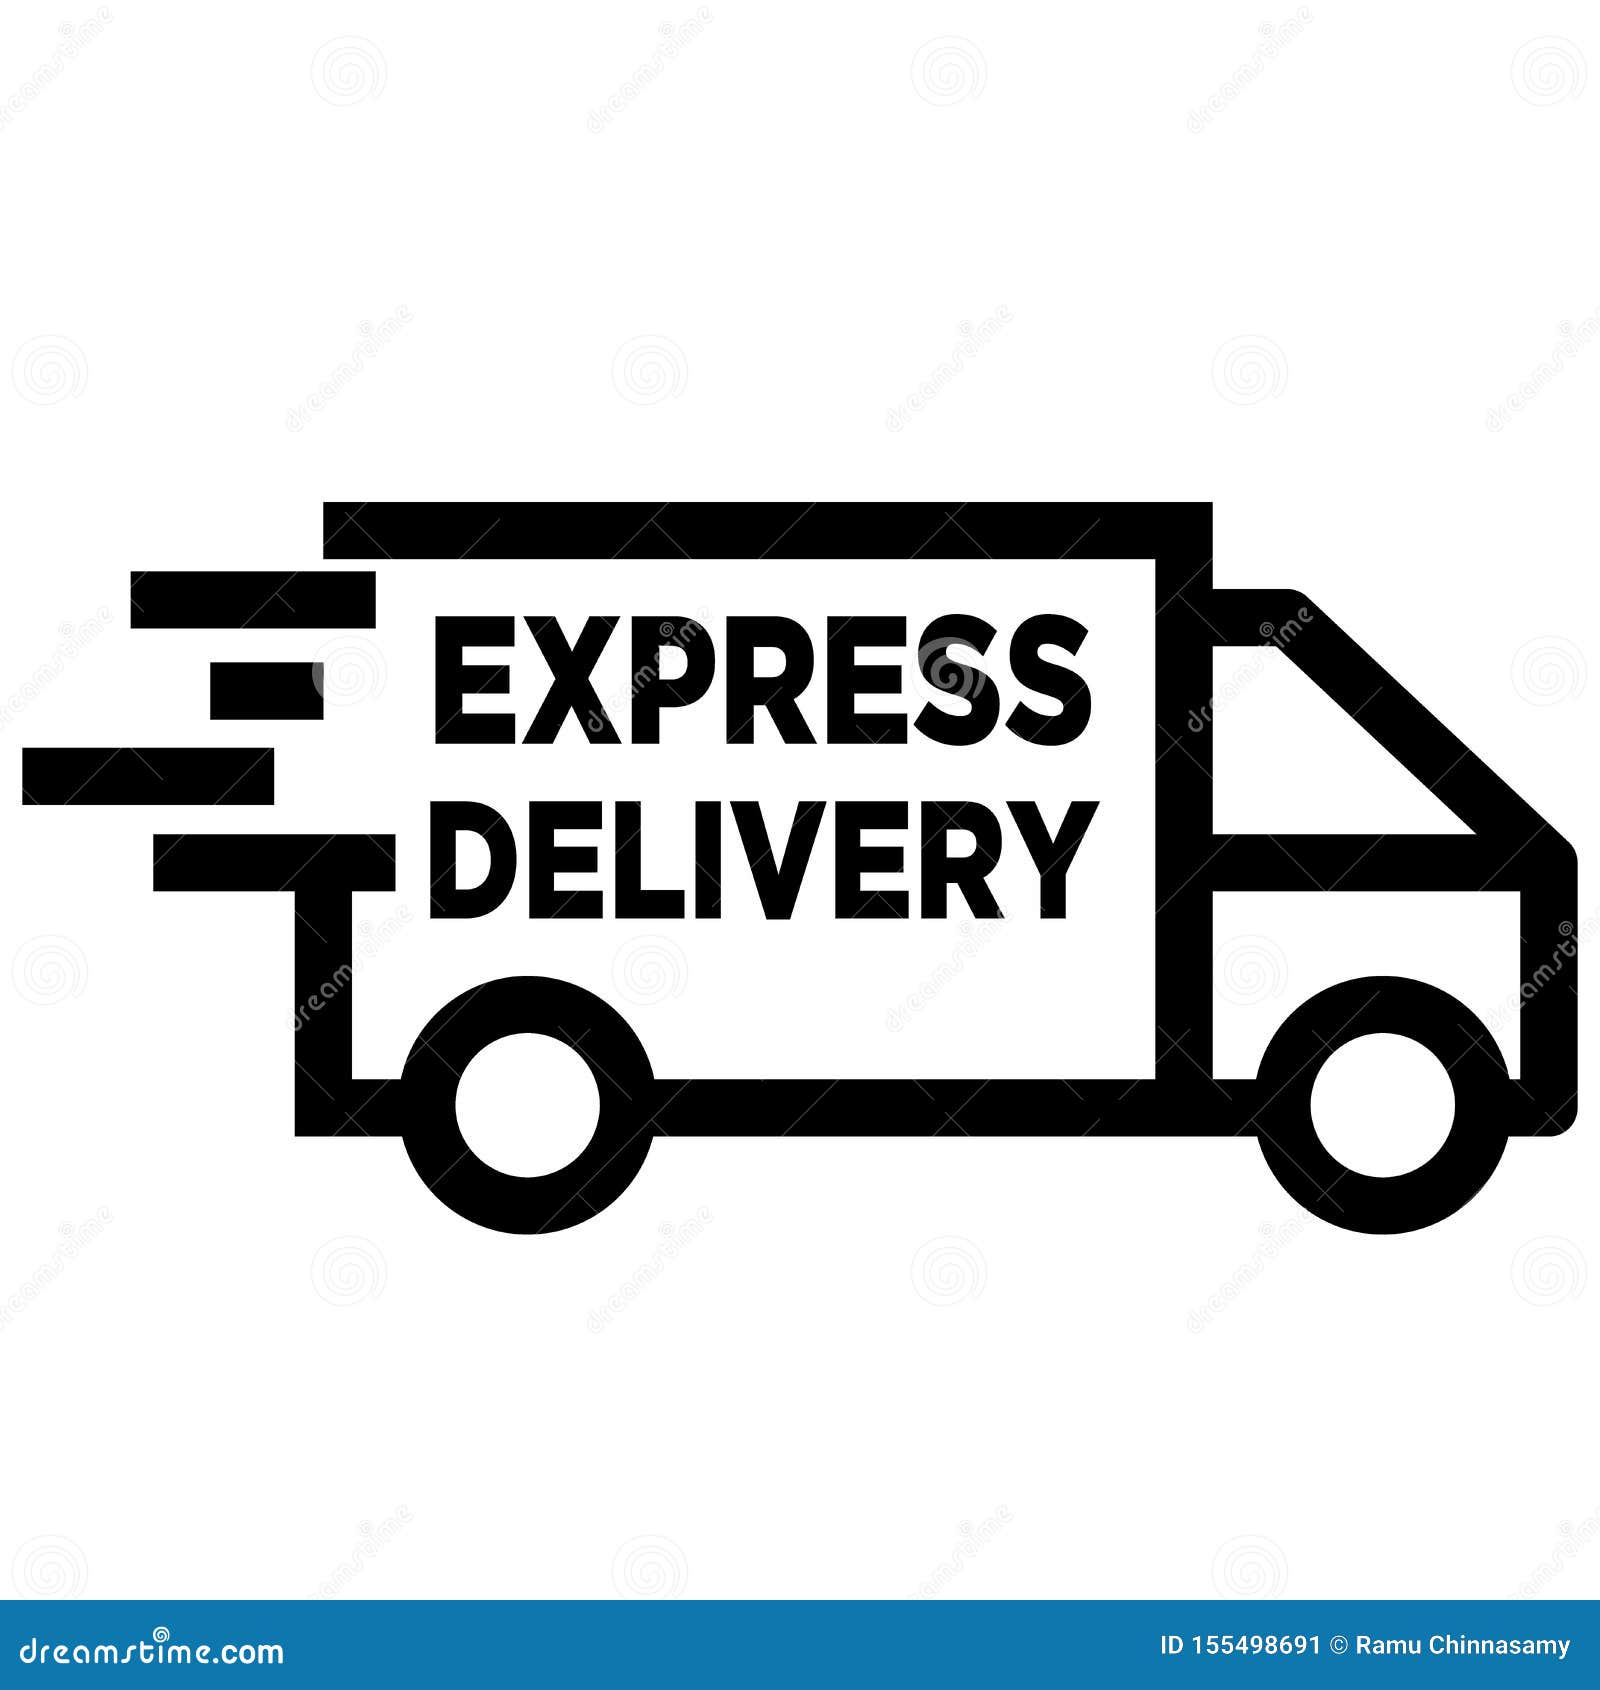 Express delivery icon stock vector. Illustration of element - 155498691